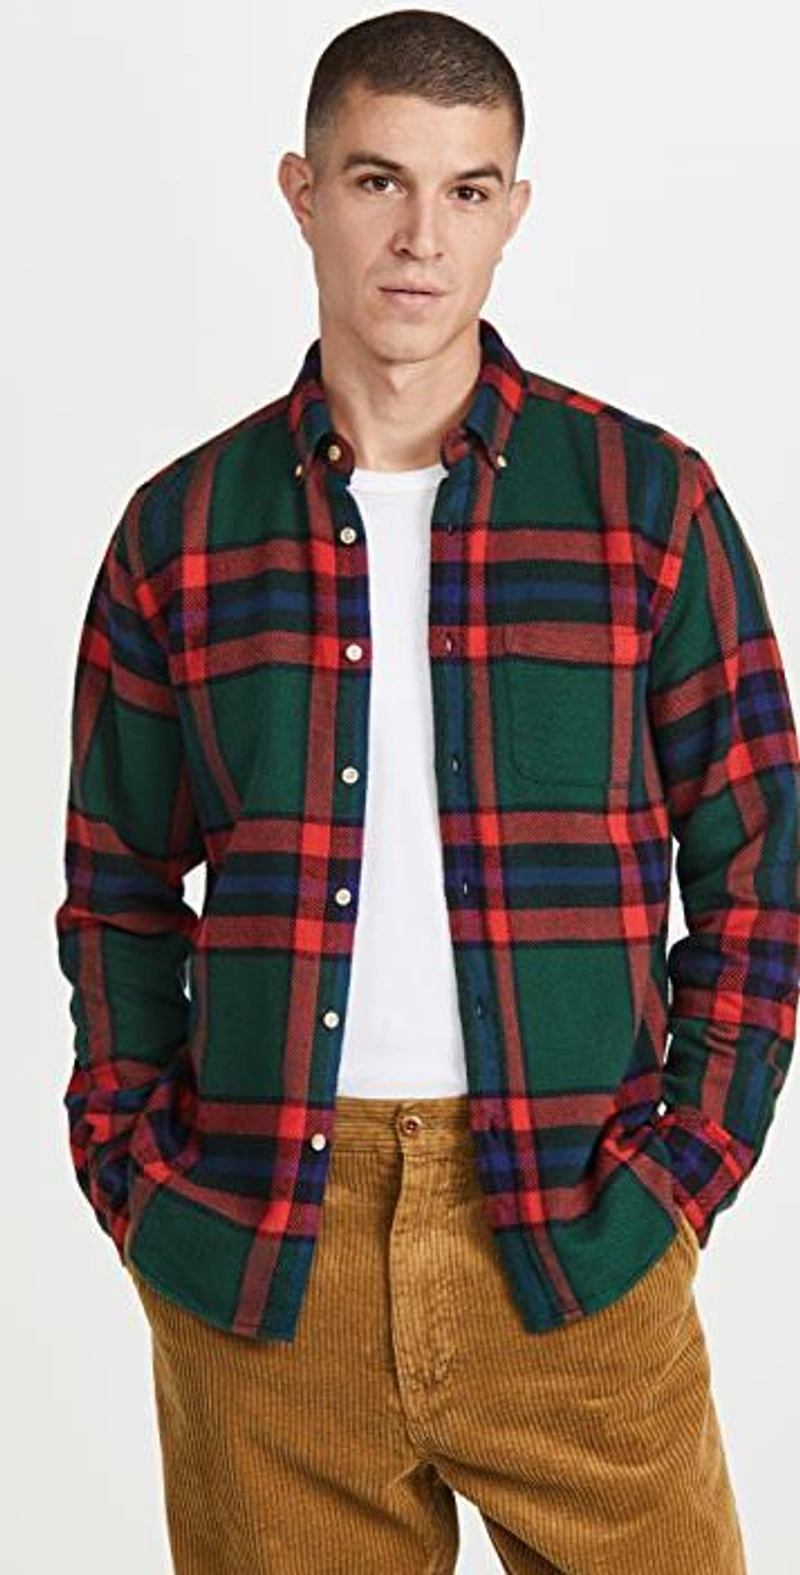 shopbop.com's Posts | 搭配: Reigning Champ T-shirt 2 Pack In Heather Grey；Portuguese Flannel Winter Blanket Plaid Flannel Button Down；Alex Mill Standard Pleated Pants In Khaki